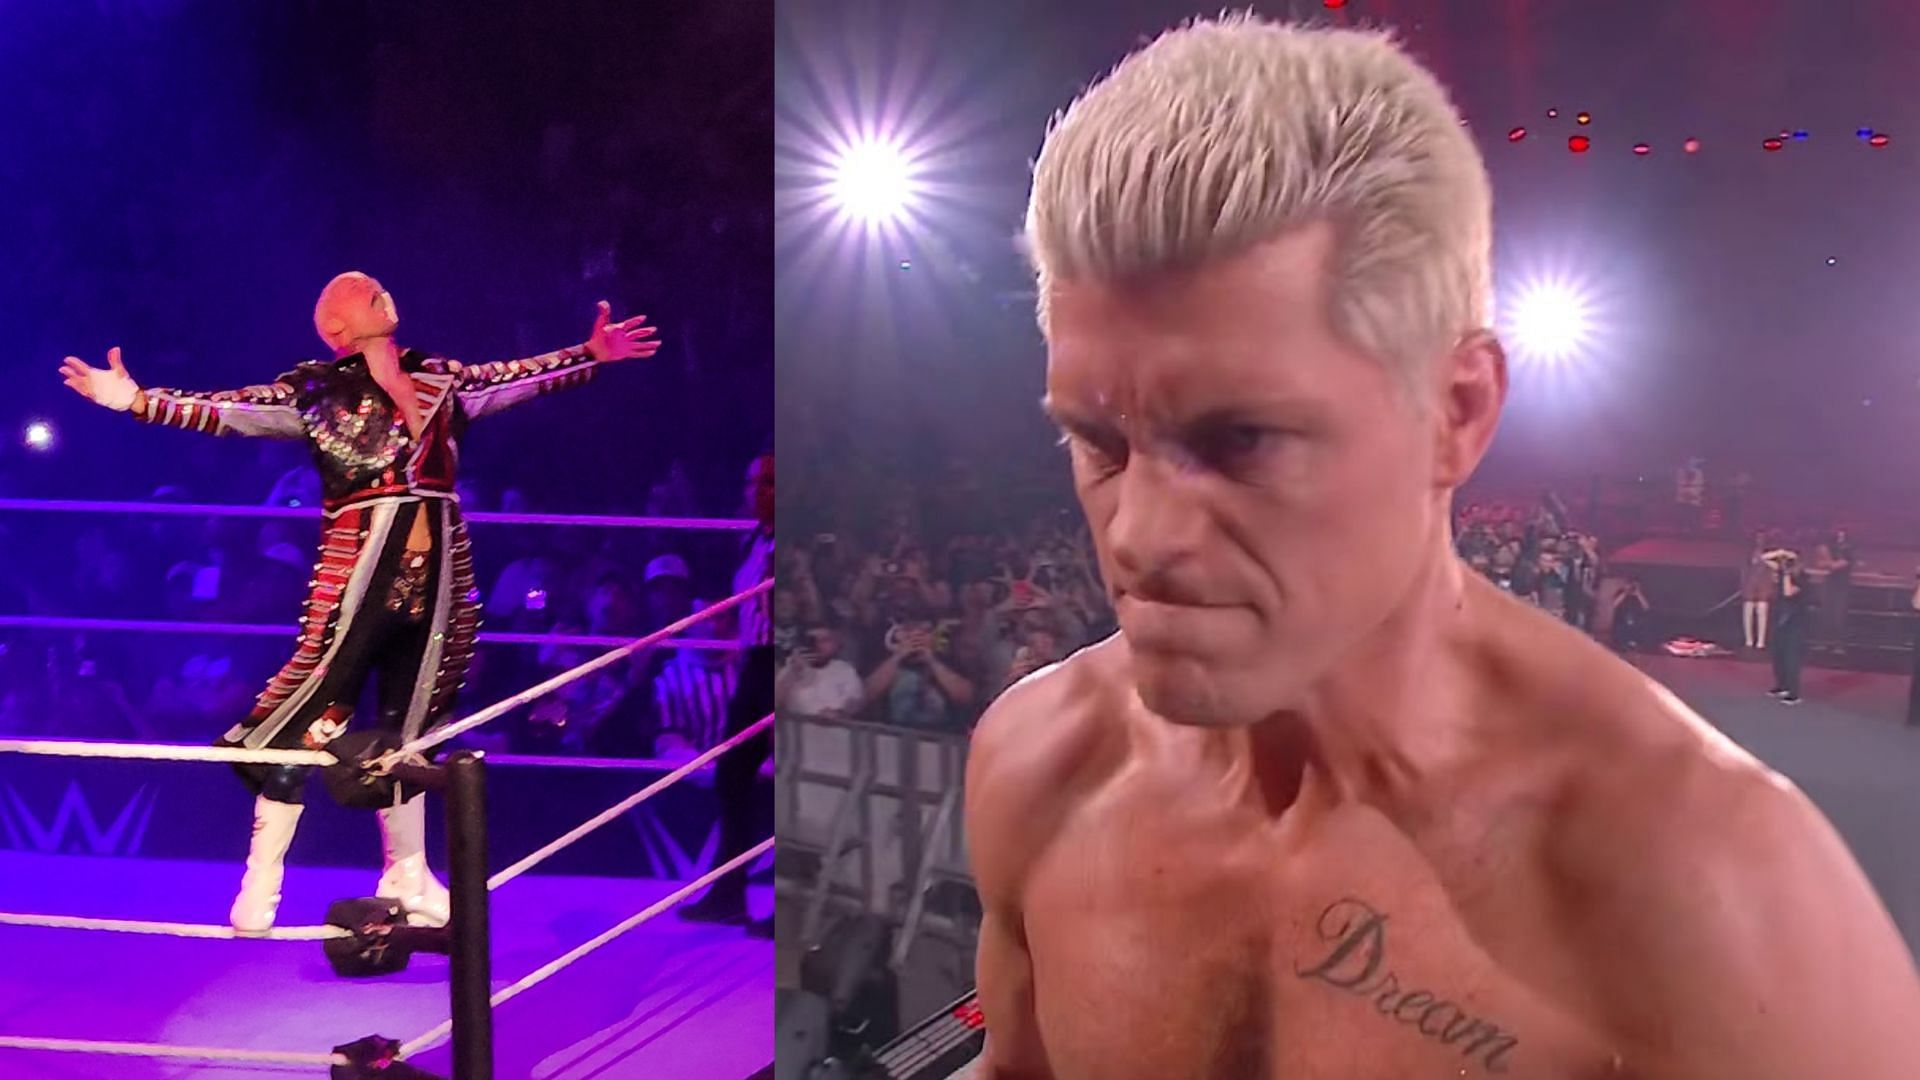 Cody Rhodes has been quite the presence since returning to WWE